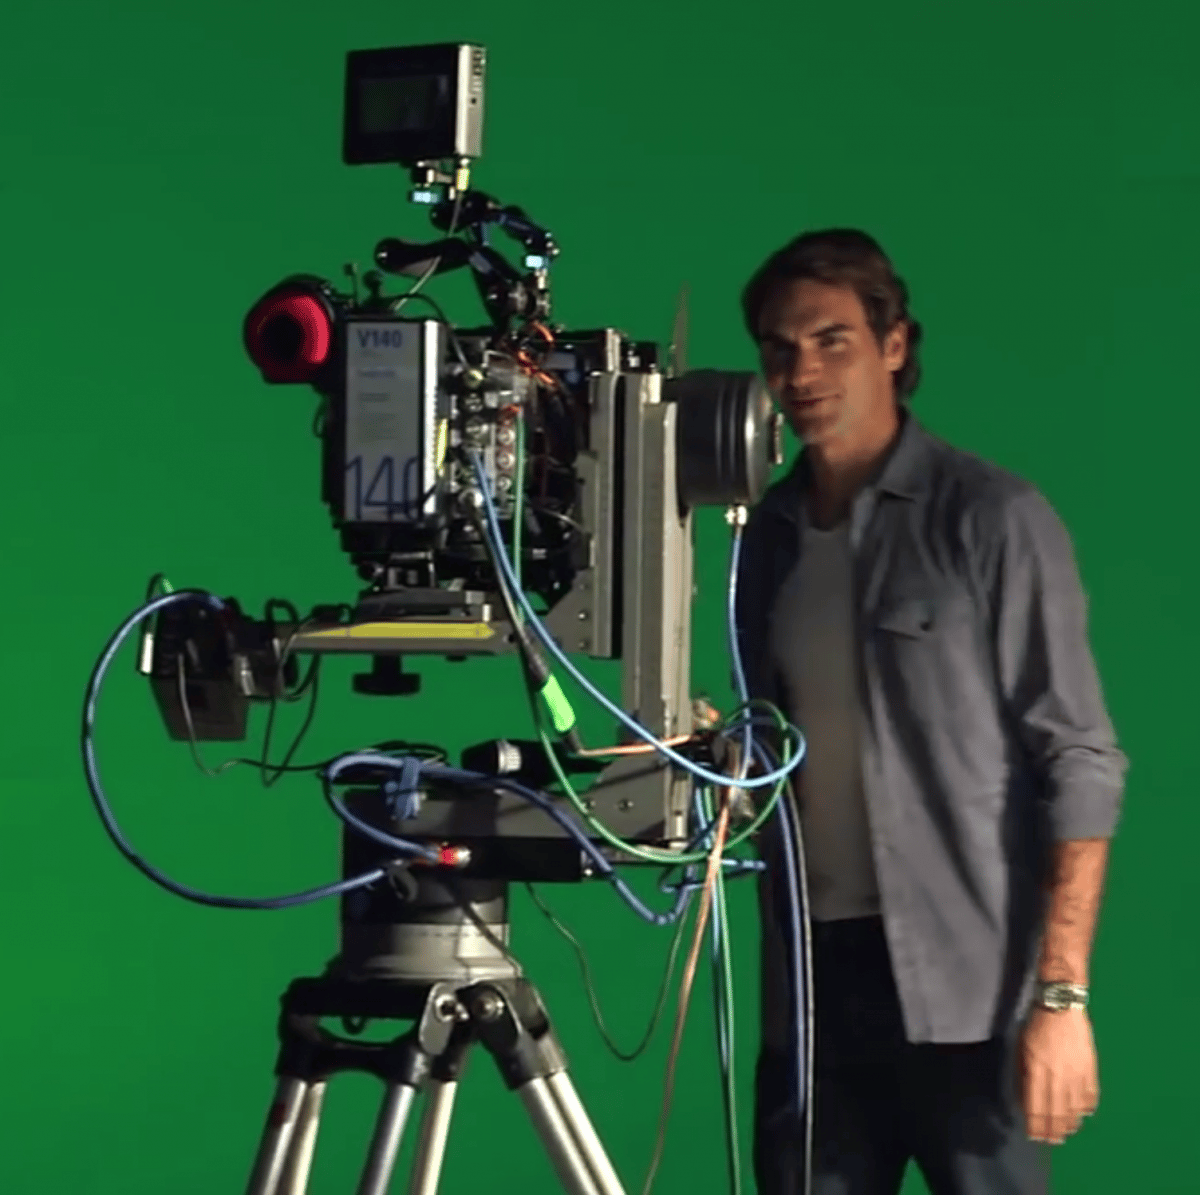 Mo-Sys Lambda Motion Control system used for Credit Suisse Commercial starring Roger Federer. Behind the scenes: https://www.youtube.com/watch?v=OaSjJyCyH-0